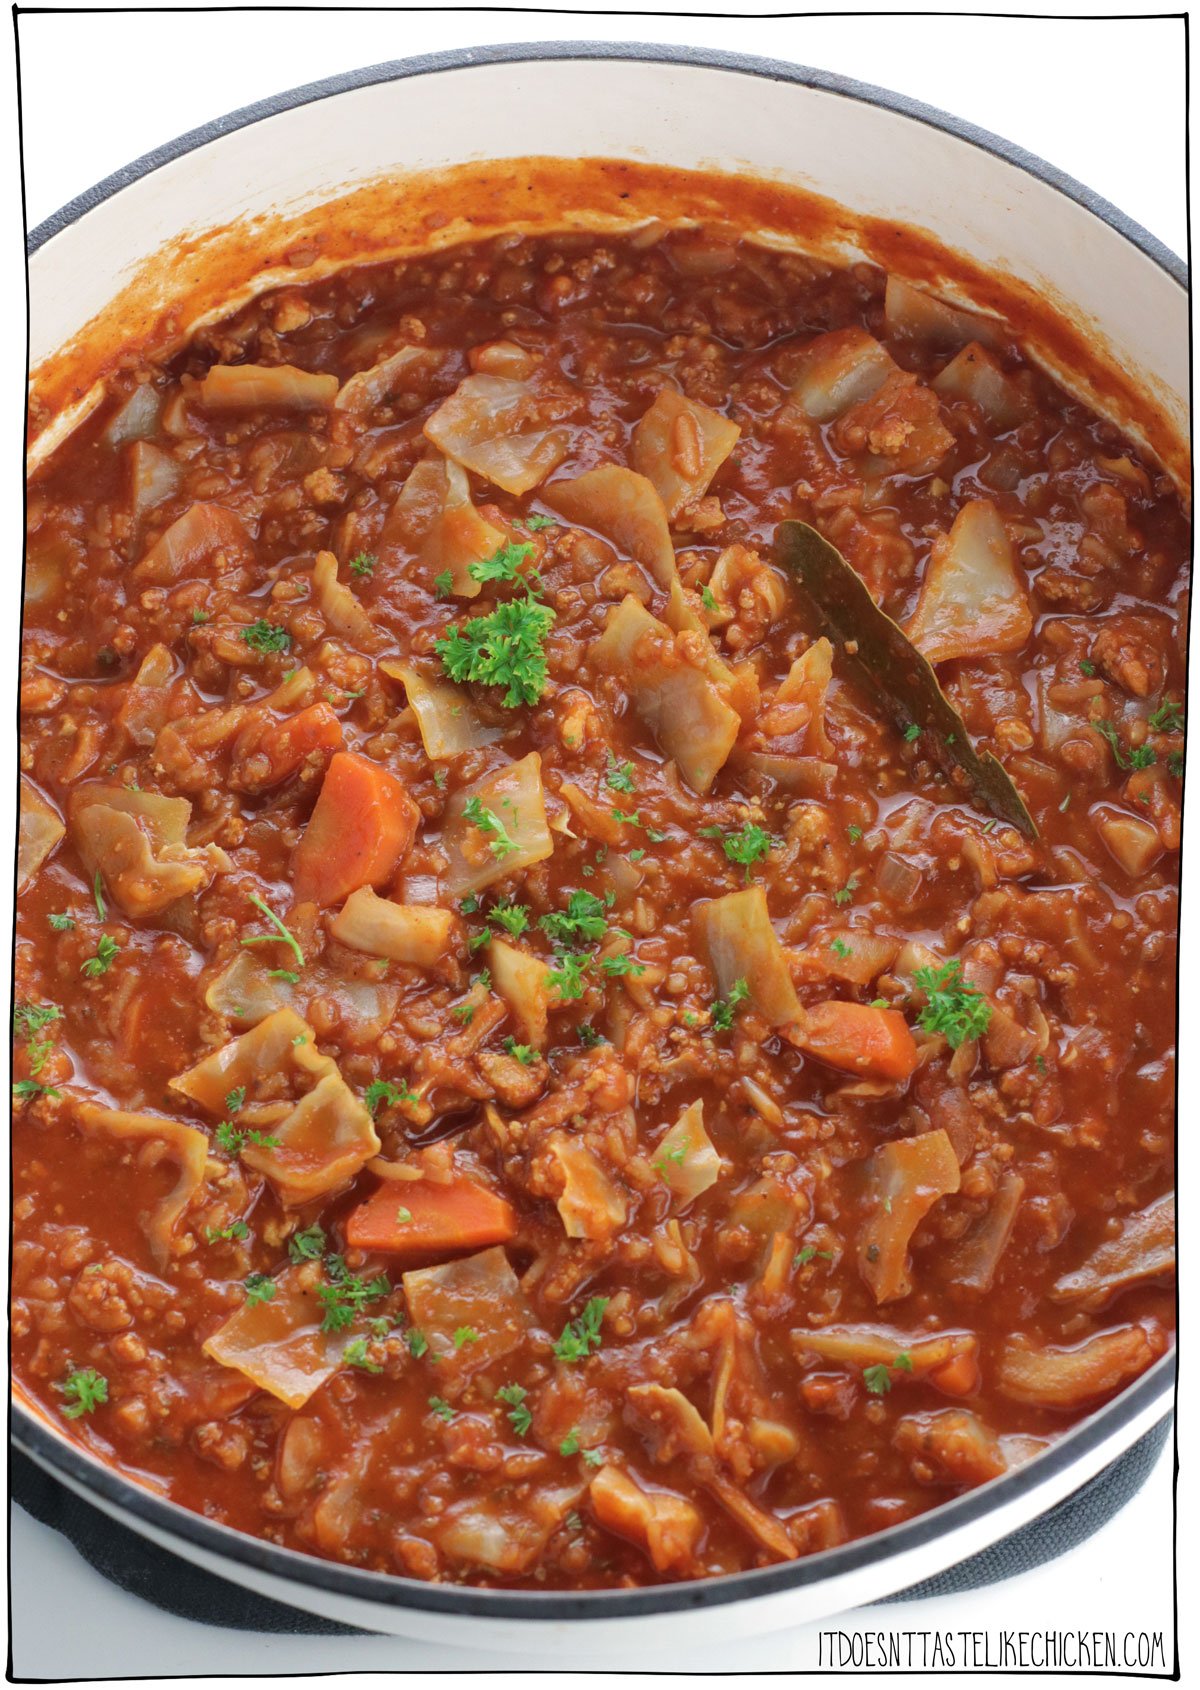 This easy vegan cabbage roll soup tastes just like cabbage rolls, but it's so much easier to make!  Very hearty and filling and made with readily available and inexpensive ingredients including cabbage, tofu, rice and canned tomatoes.  If you love cabbage rolls, but don't like all the work, this Unstuffed Cabbage Roll Soup is for you!  #itdoesnttastelikechicken #veganrecipes #soup